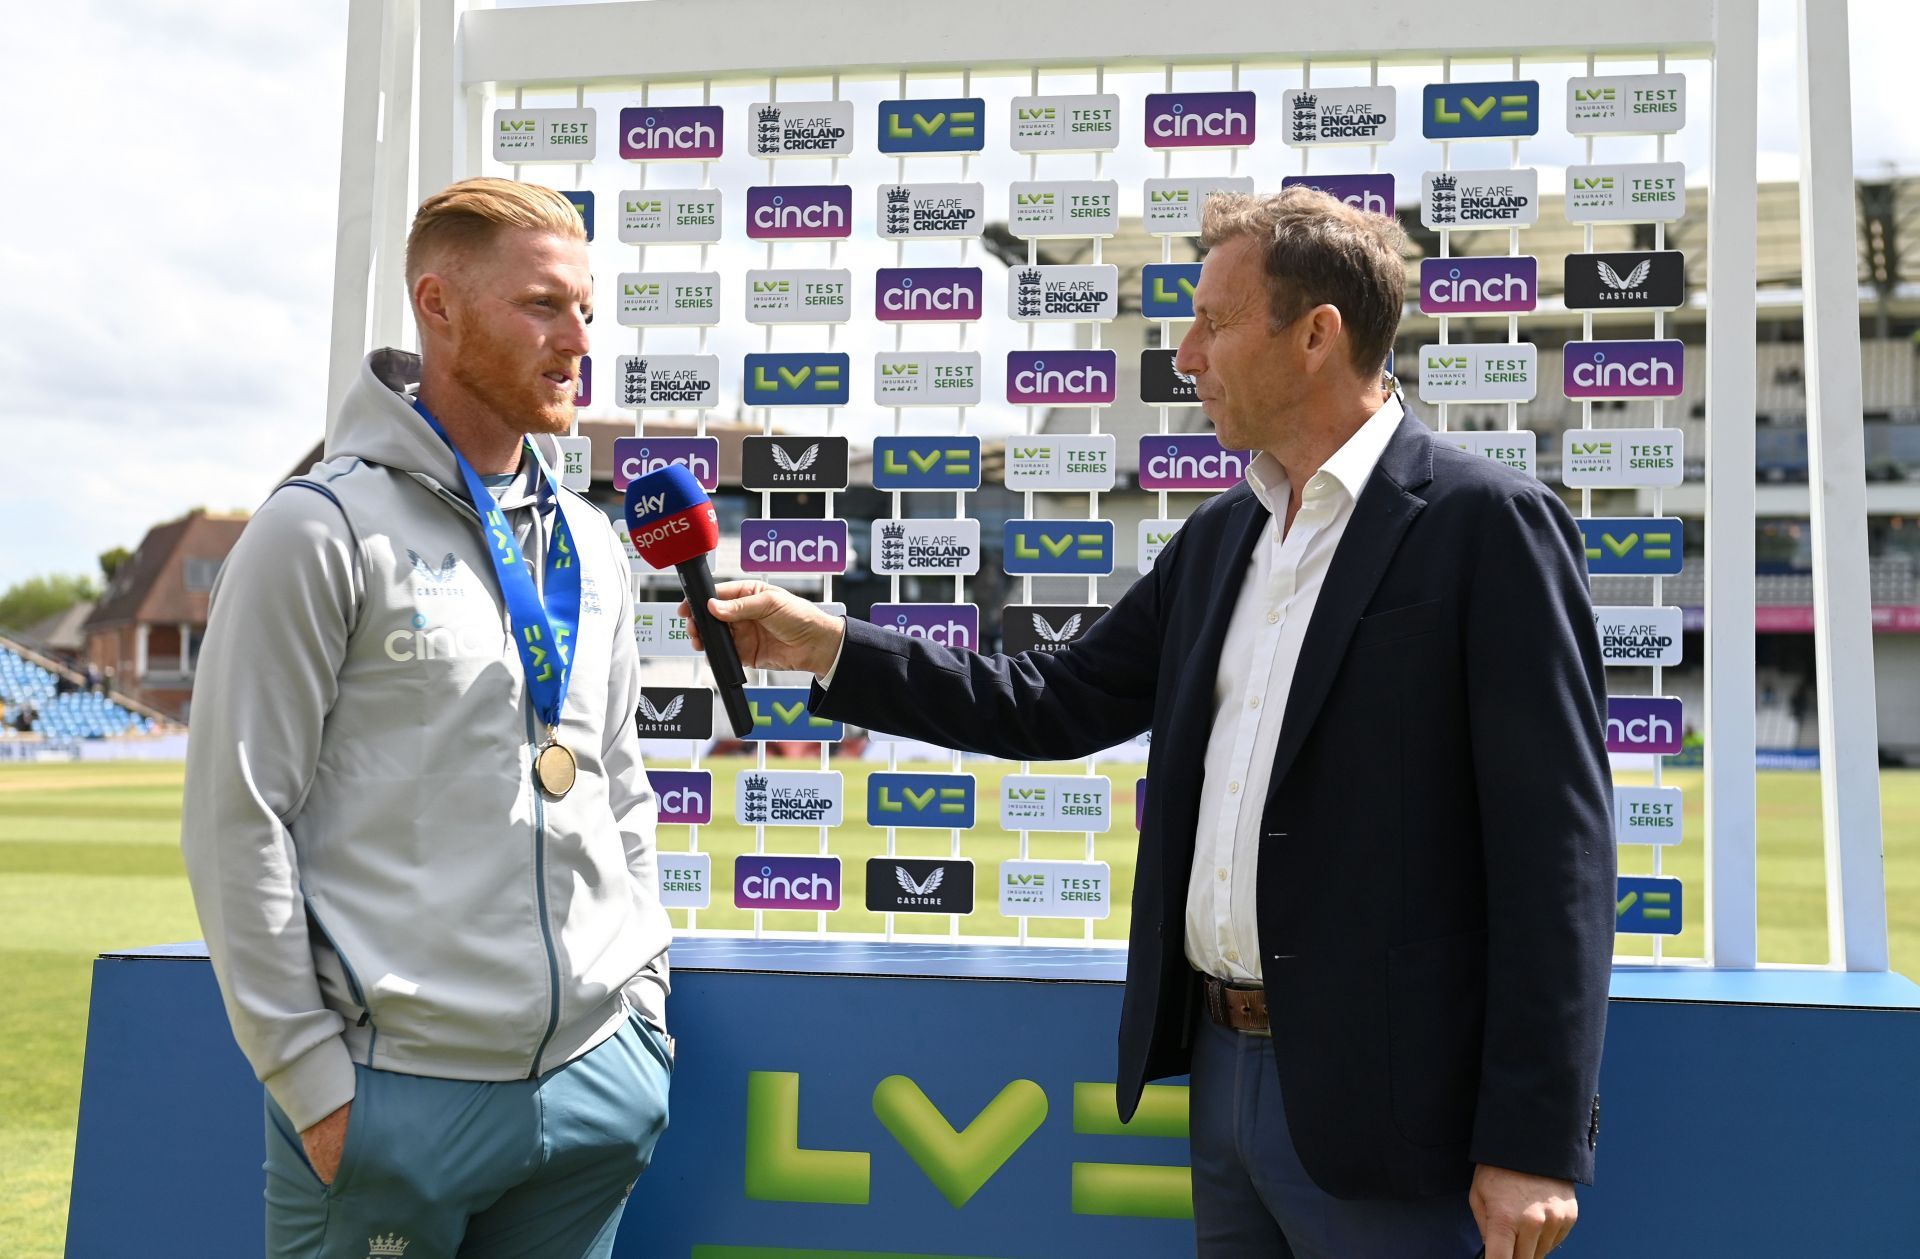 Ben Stokes spoke at the post-match presentation after the win in Leeds today (Image Courtesy: Getty Images)